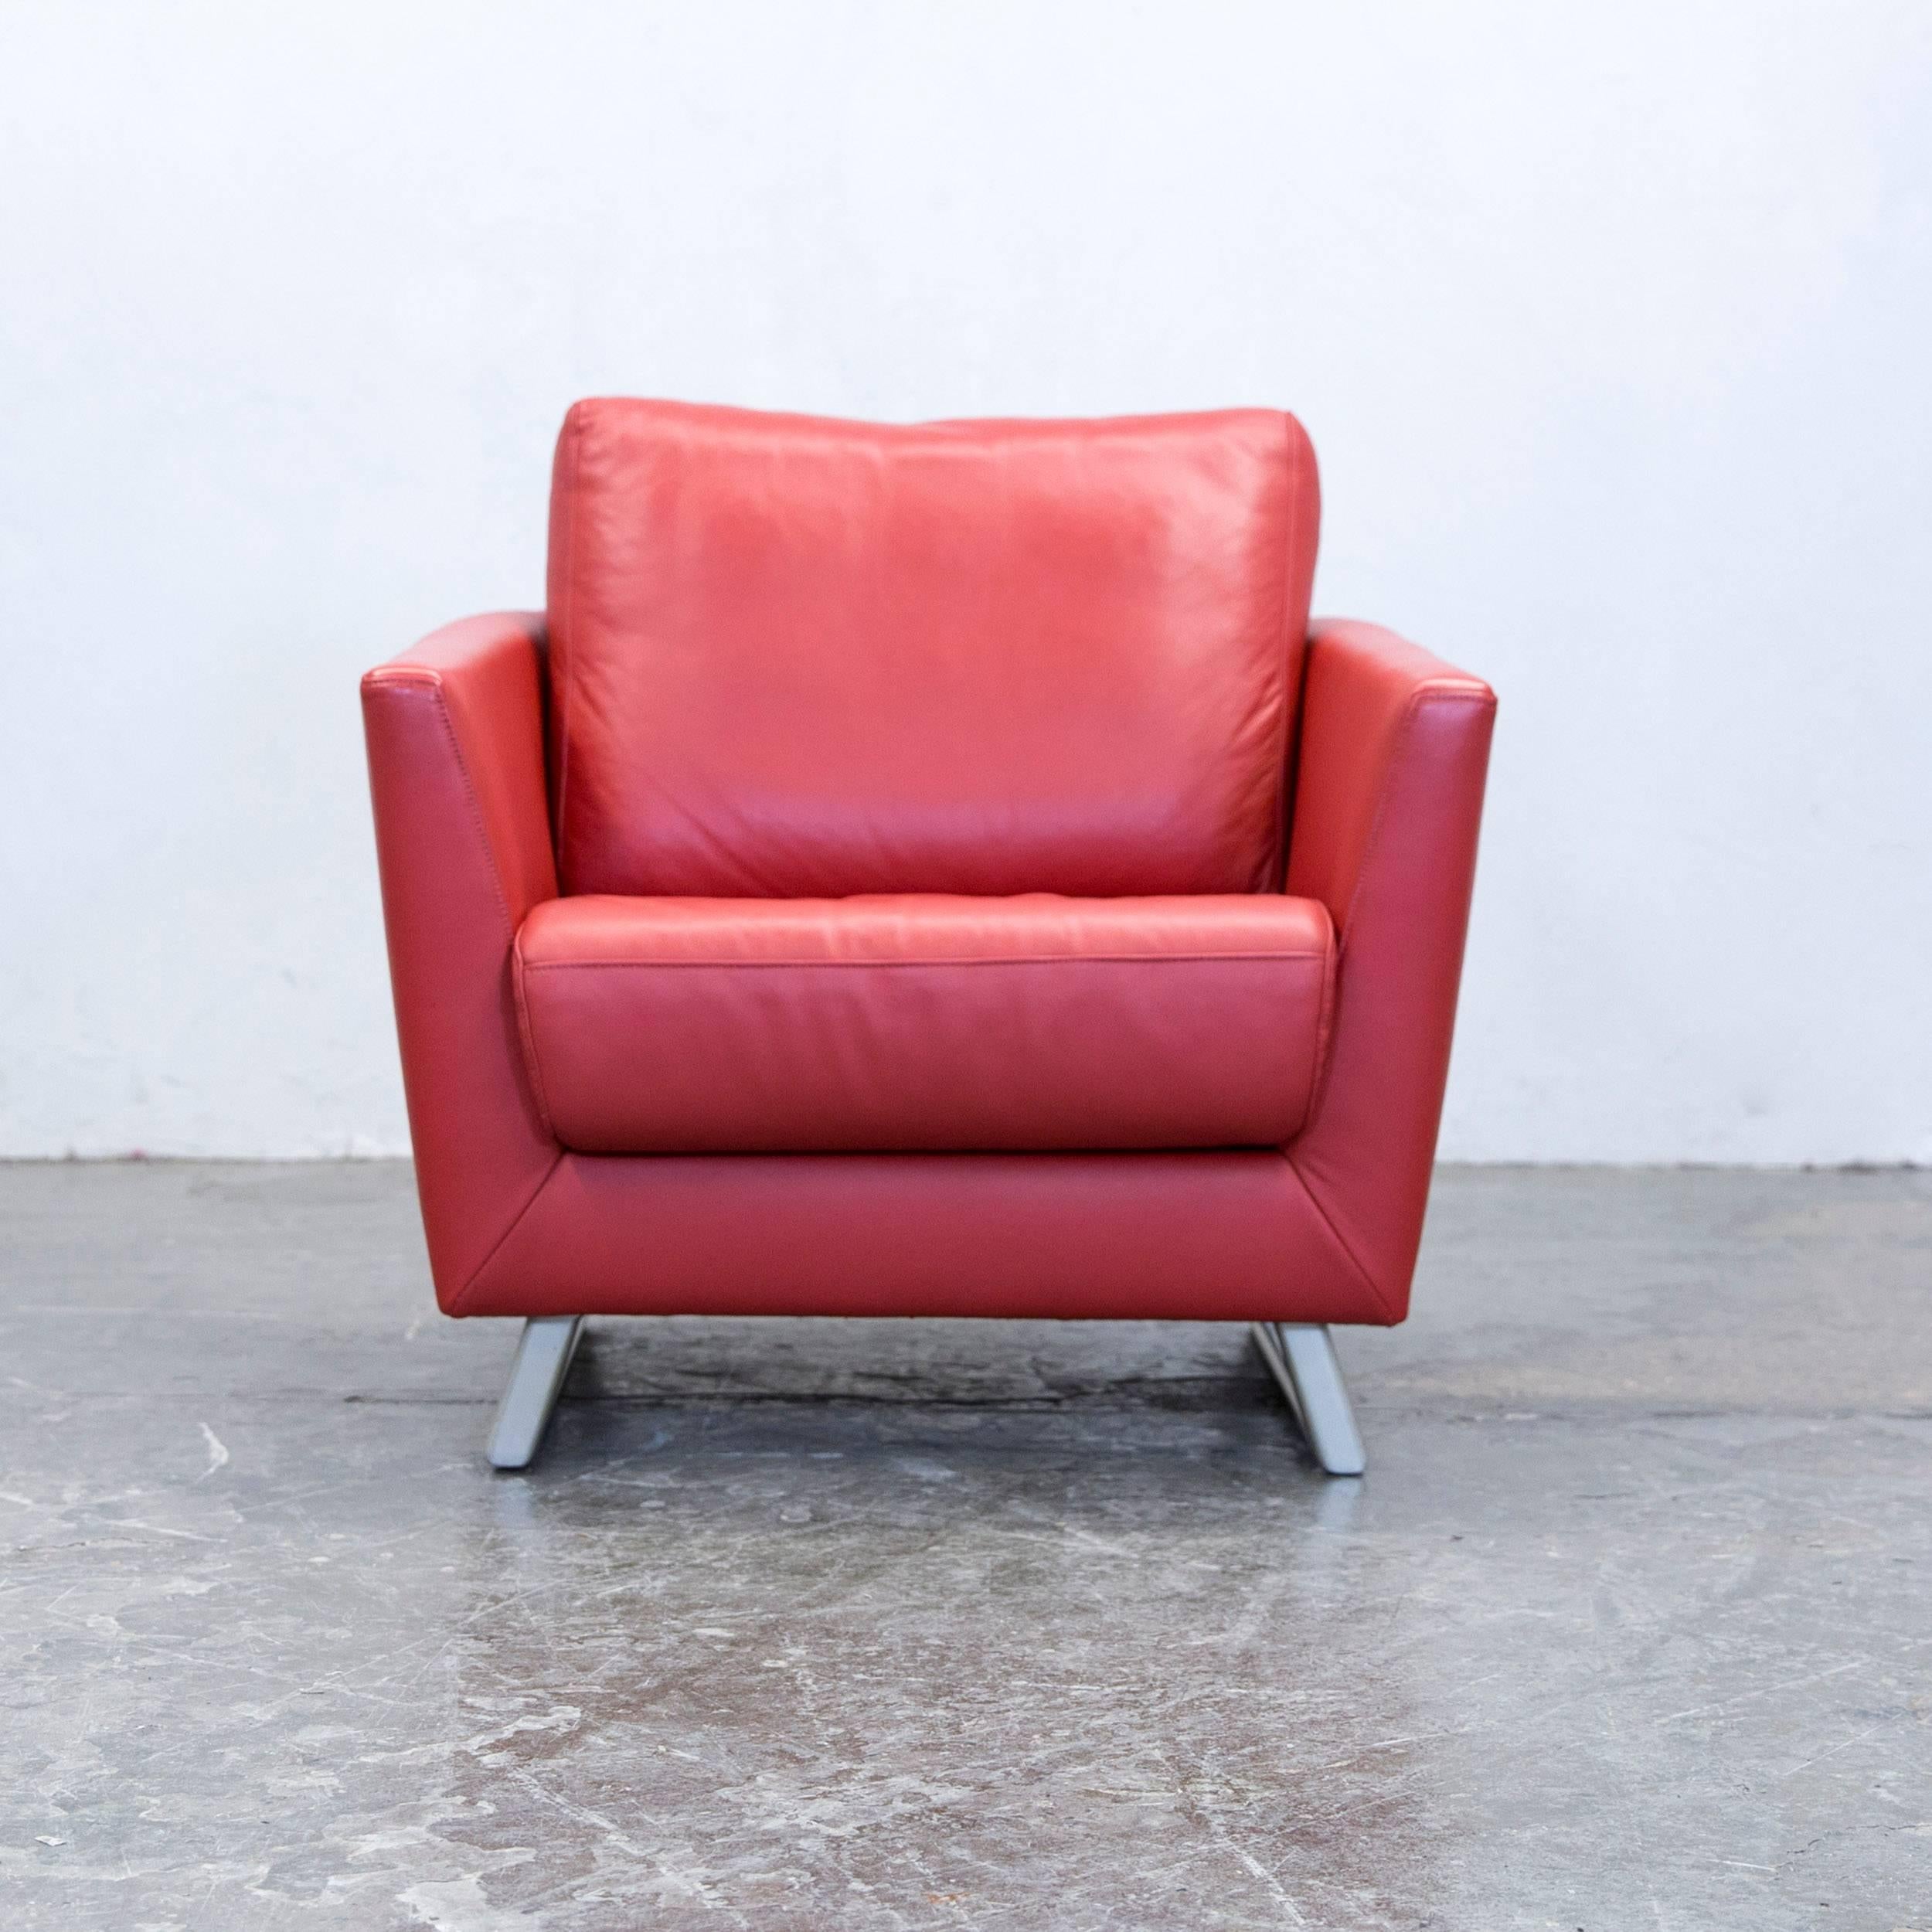 Red colored designer leather armchair, in a minimalistic and modern design, made for pure comfort.